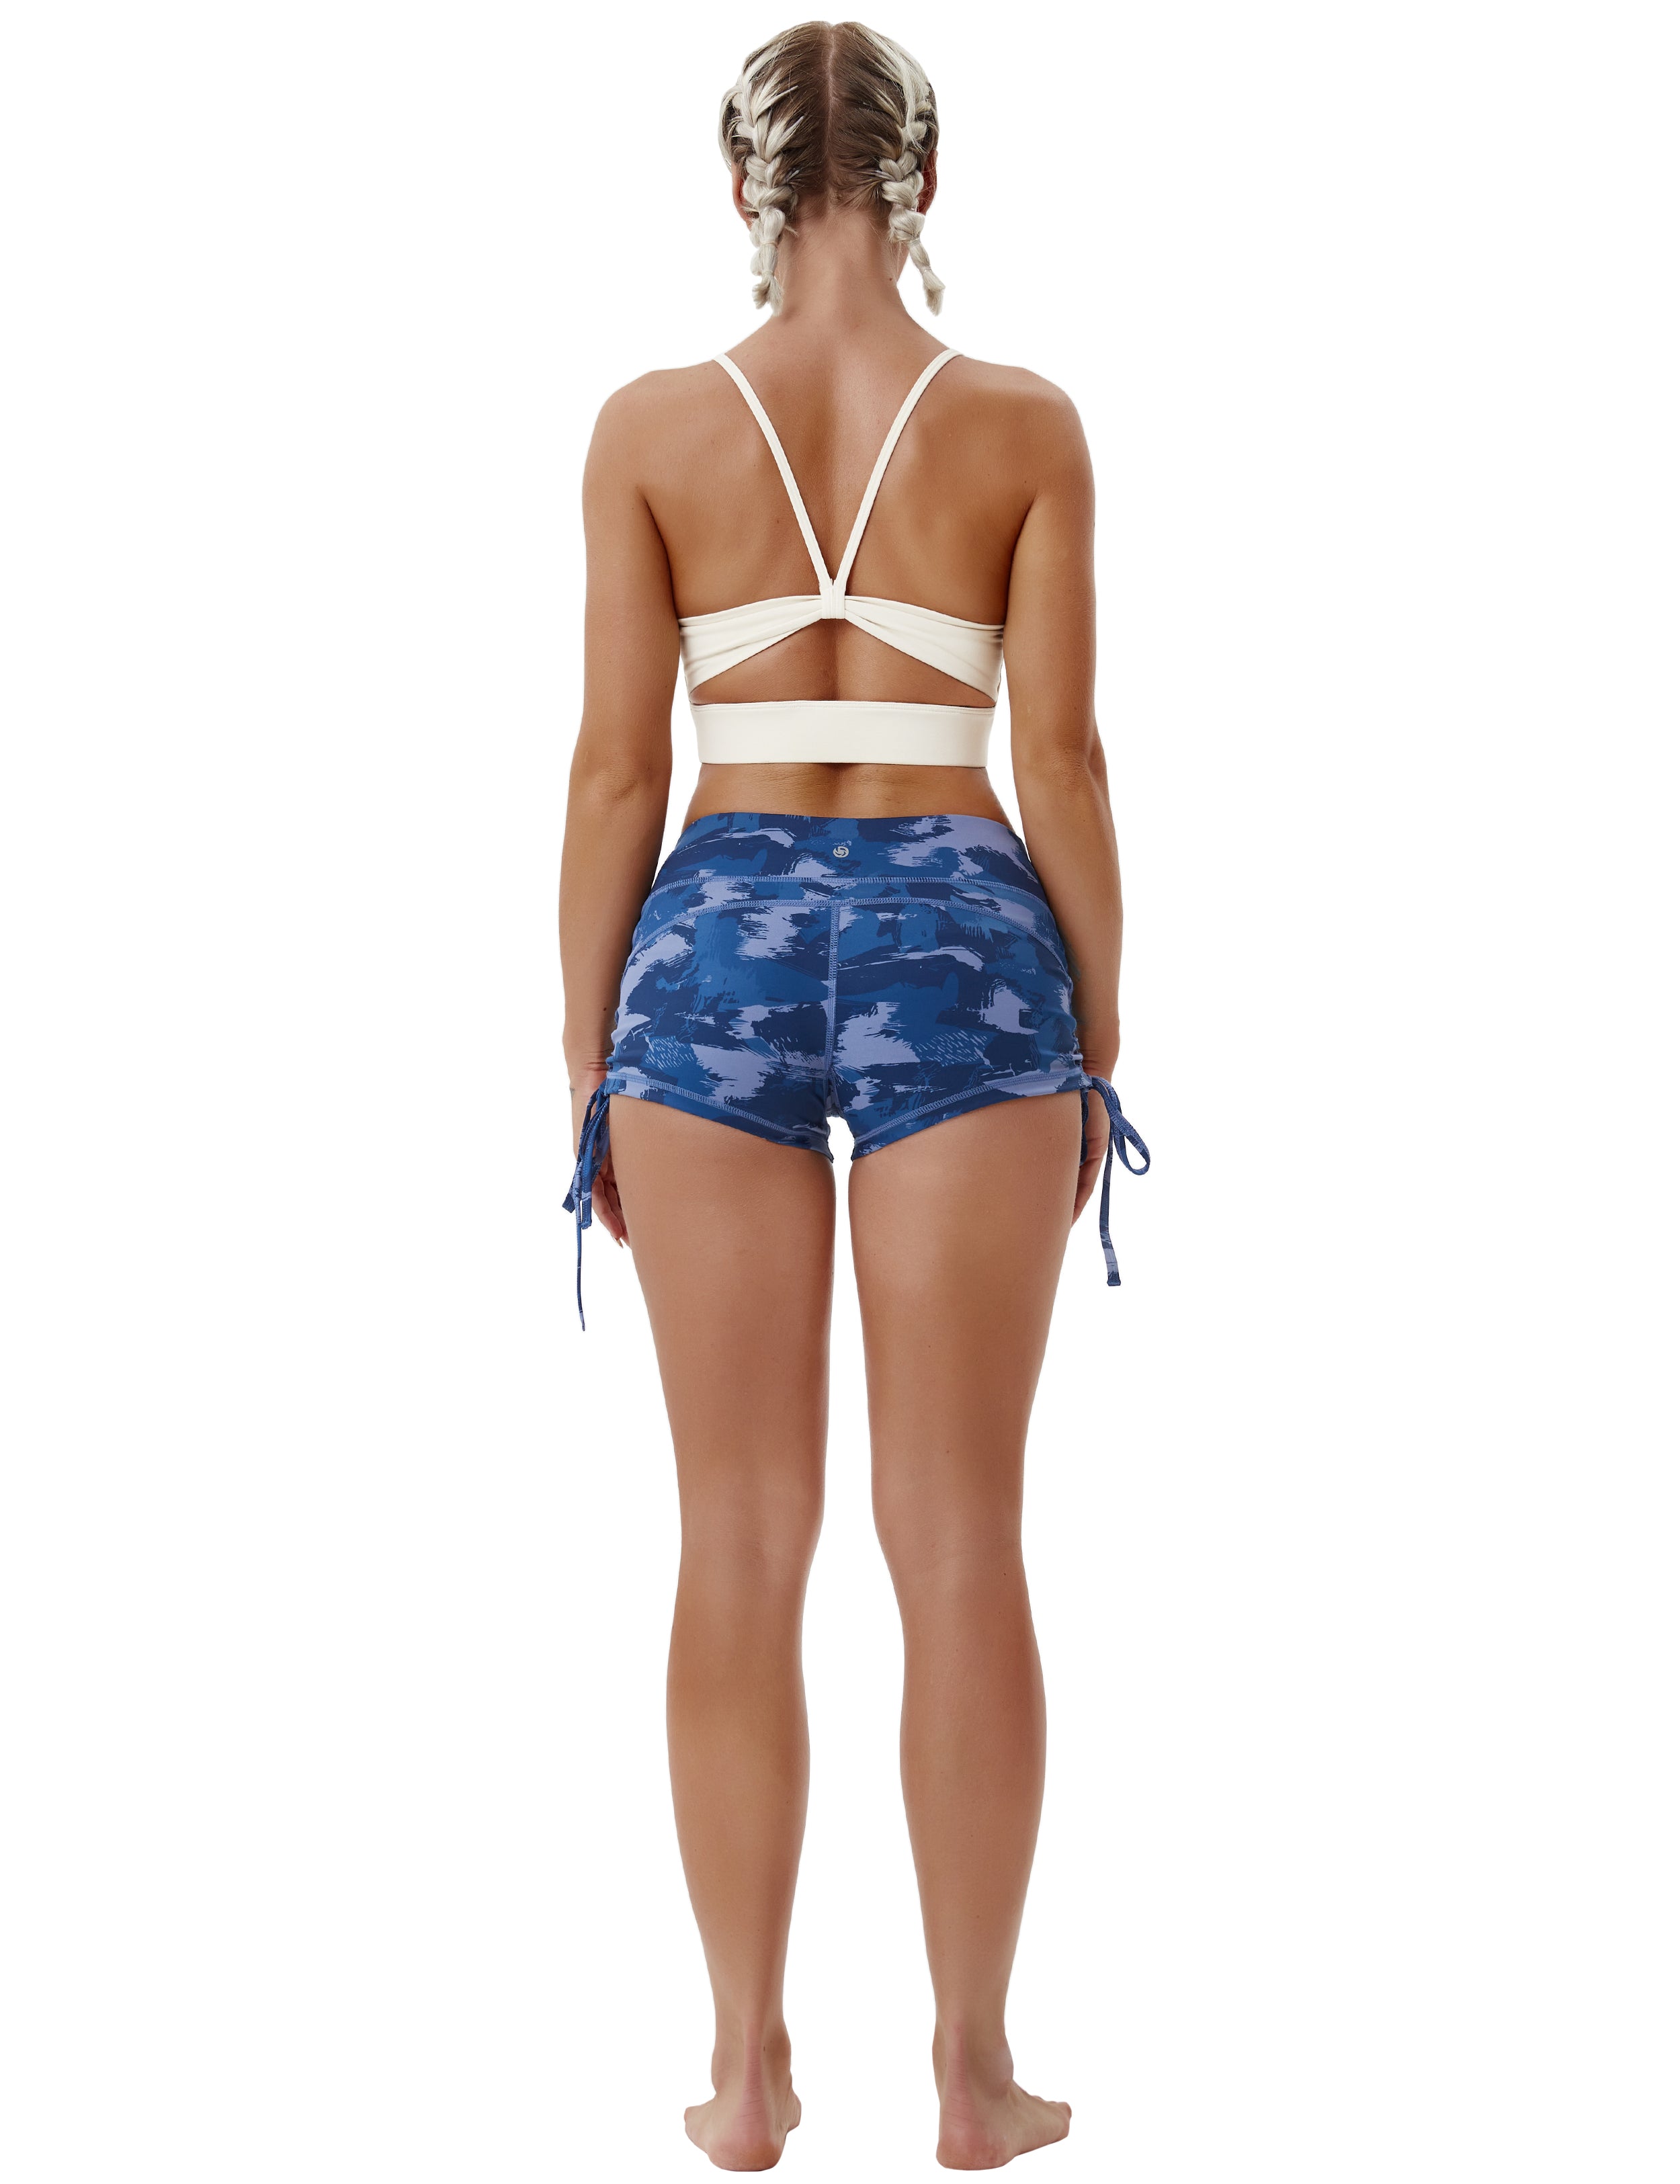 Printed Side Drawstring Hot Shorts navy brushcamo Sleek, soft, smooth and totally comfortable: our newest sexy style is here. Softest-ever fabric High elasticity High density 4-way stretch Fabric doesn't attract lint easily No see-through Moisture-wicking Machine wash 78% Polyester, 22% Spandex